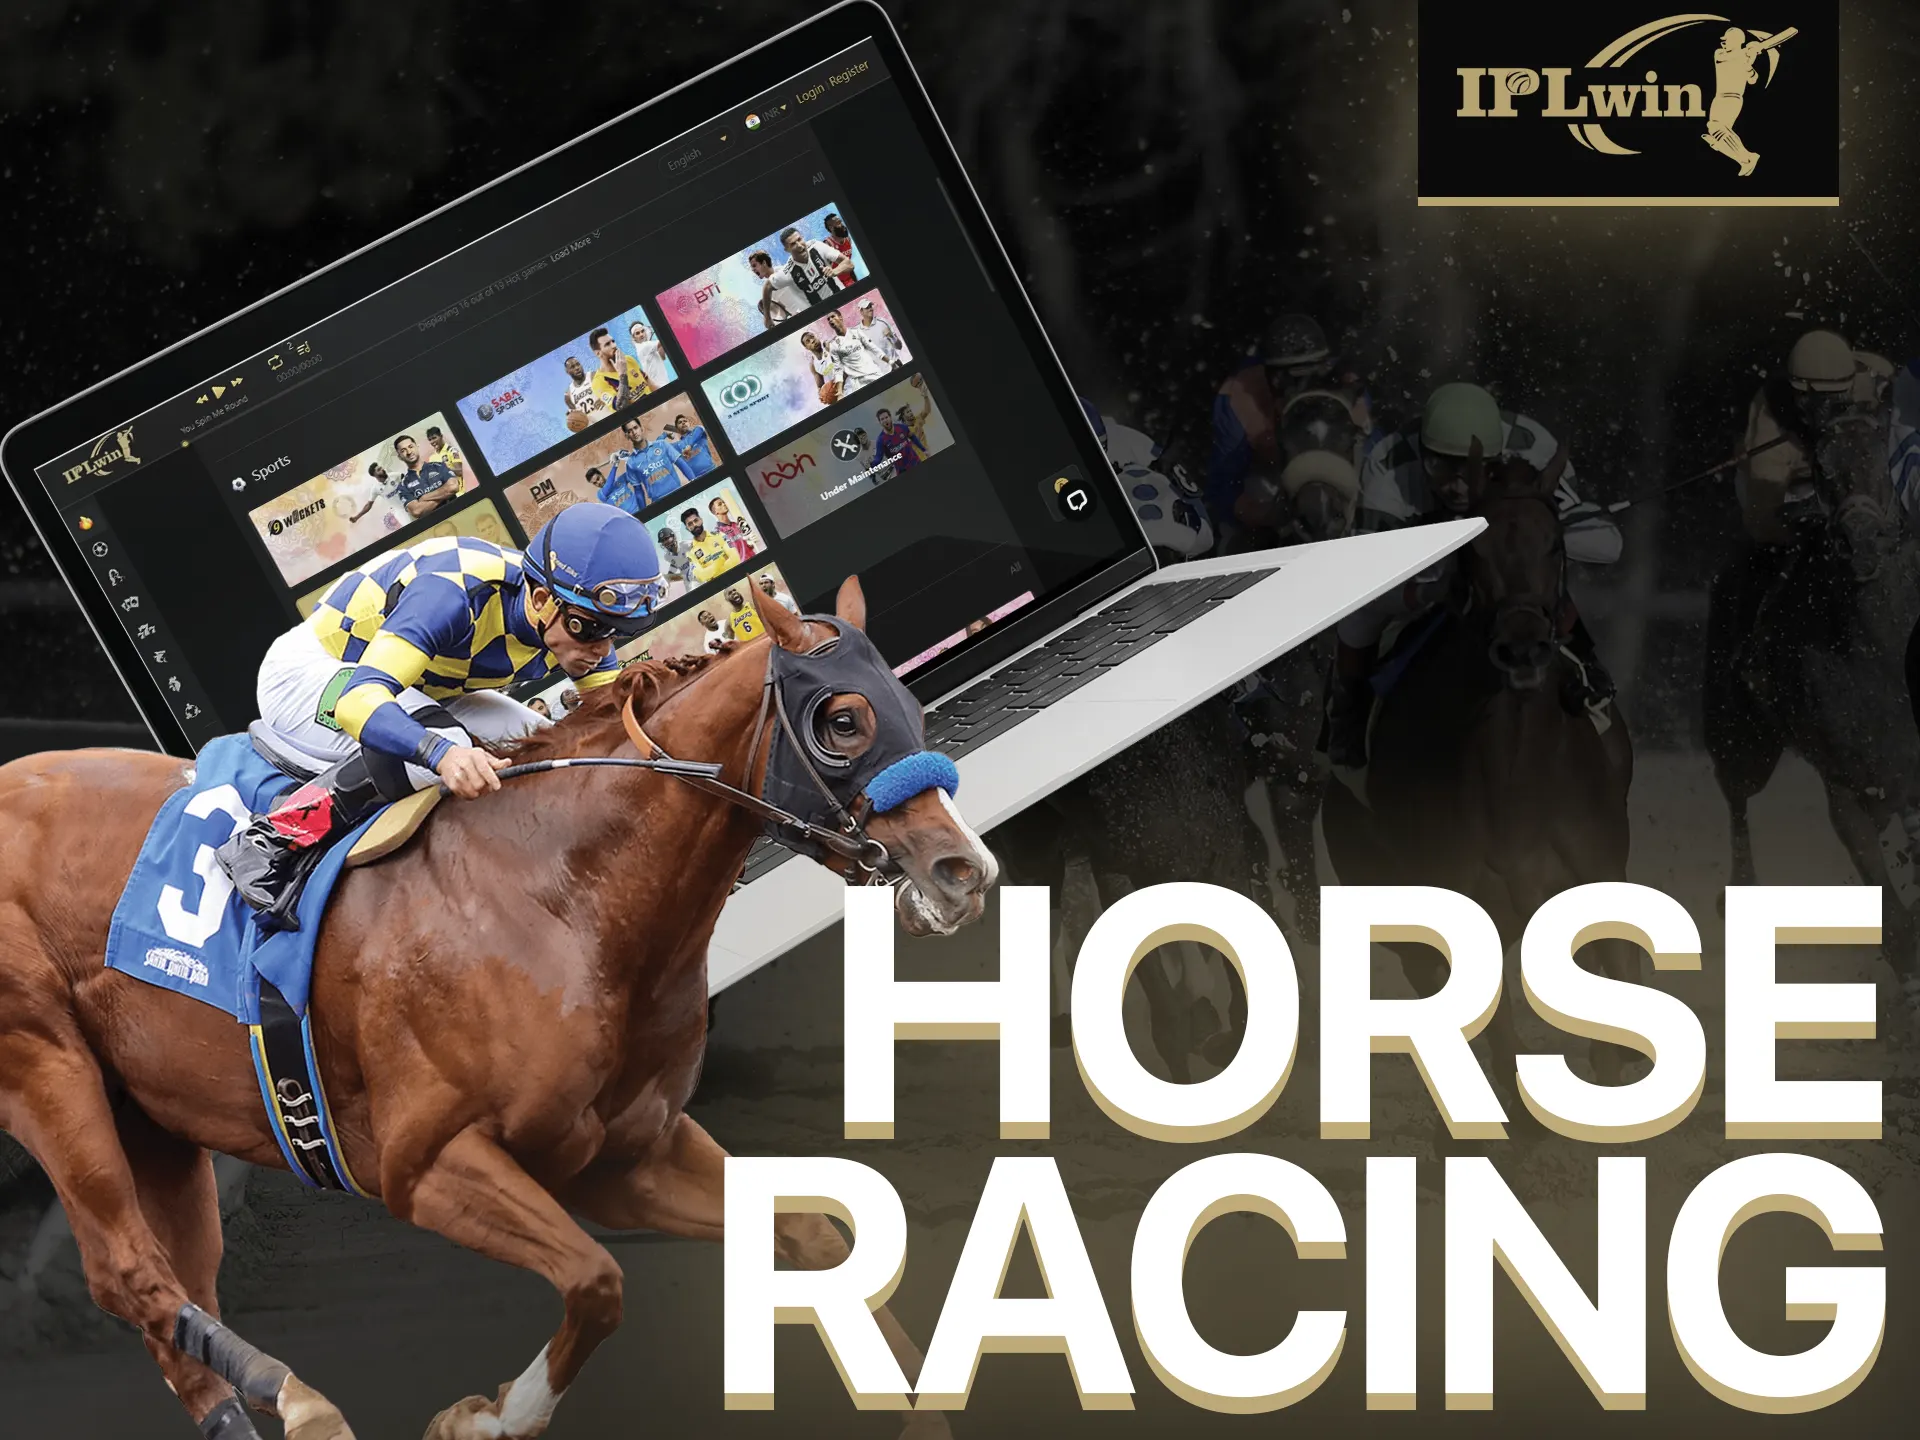 With IPLWIN, make bets on horse racing.